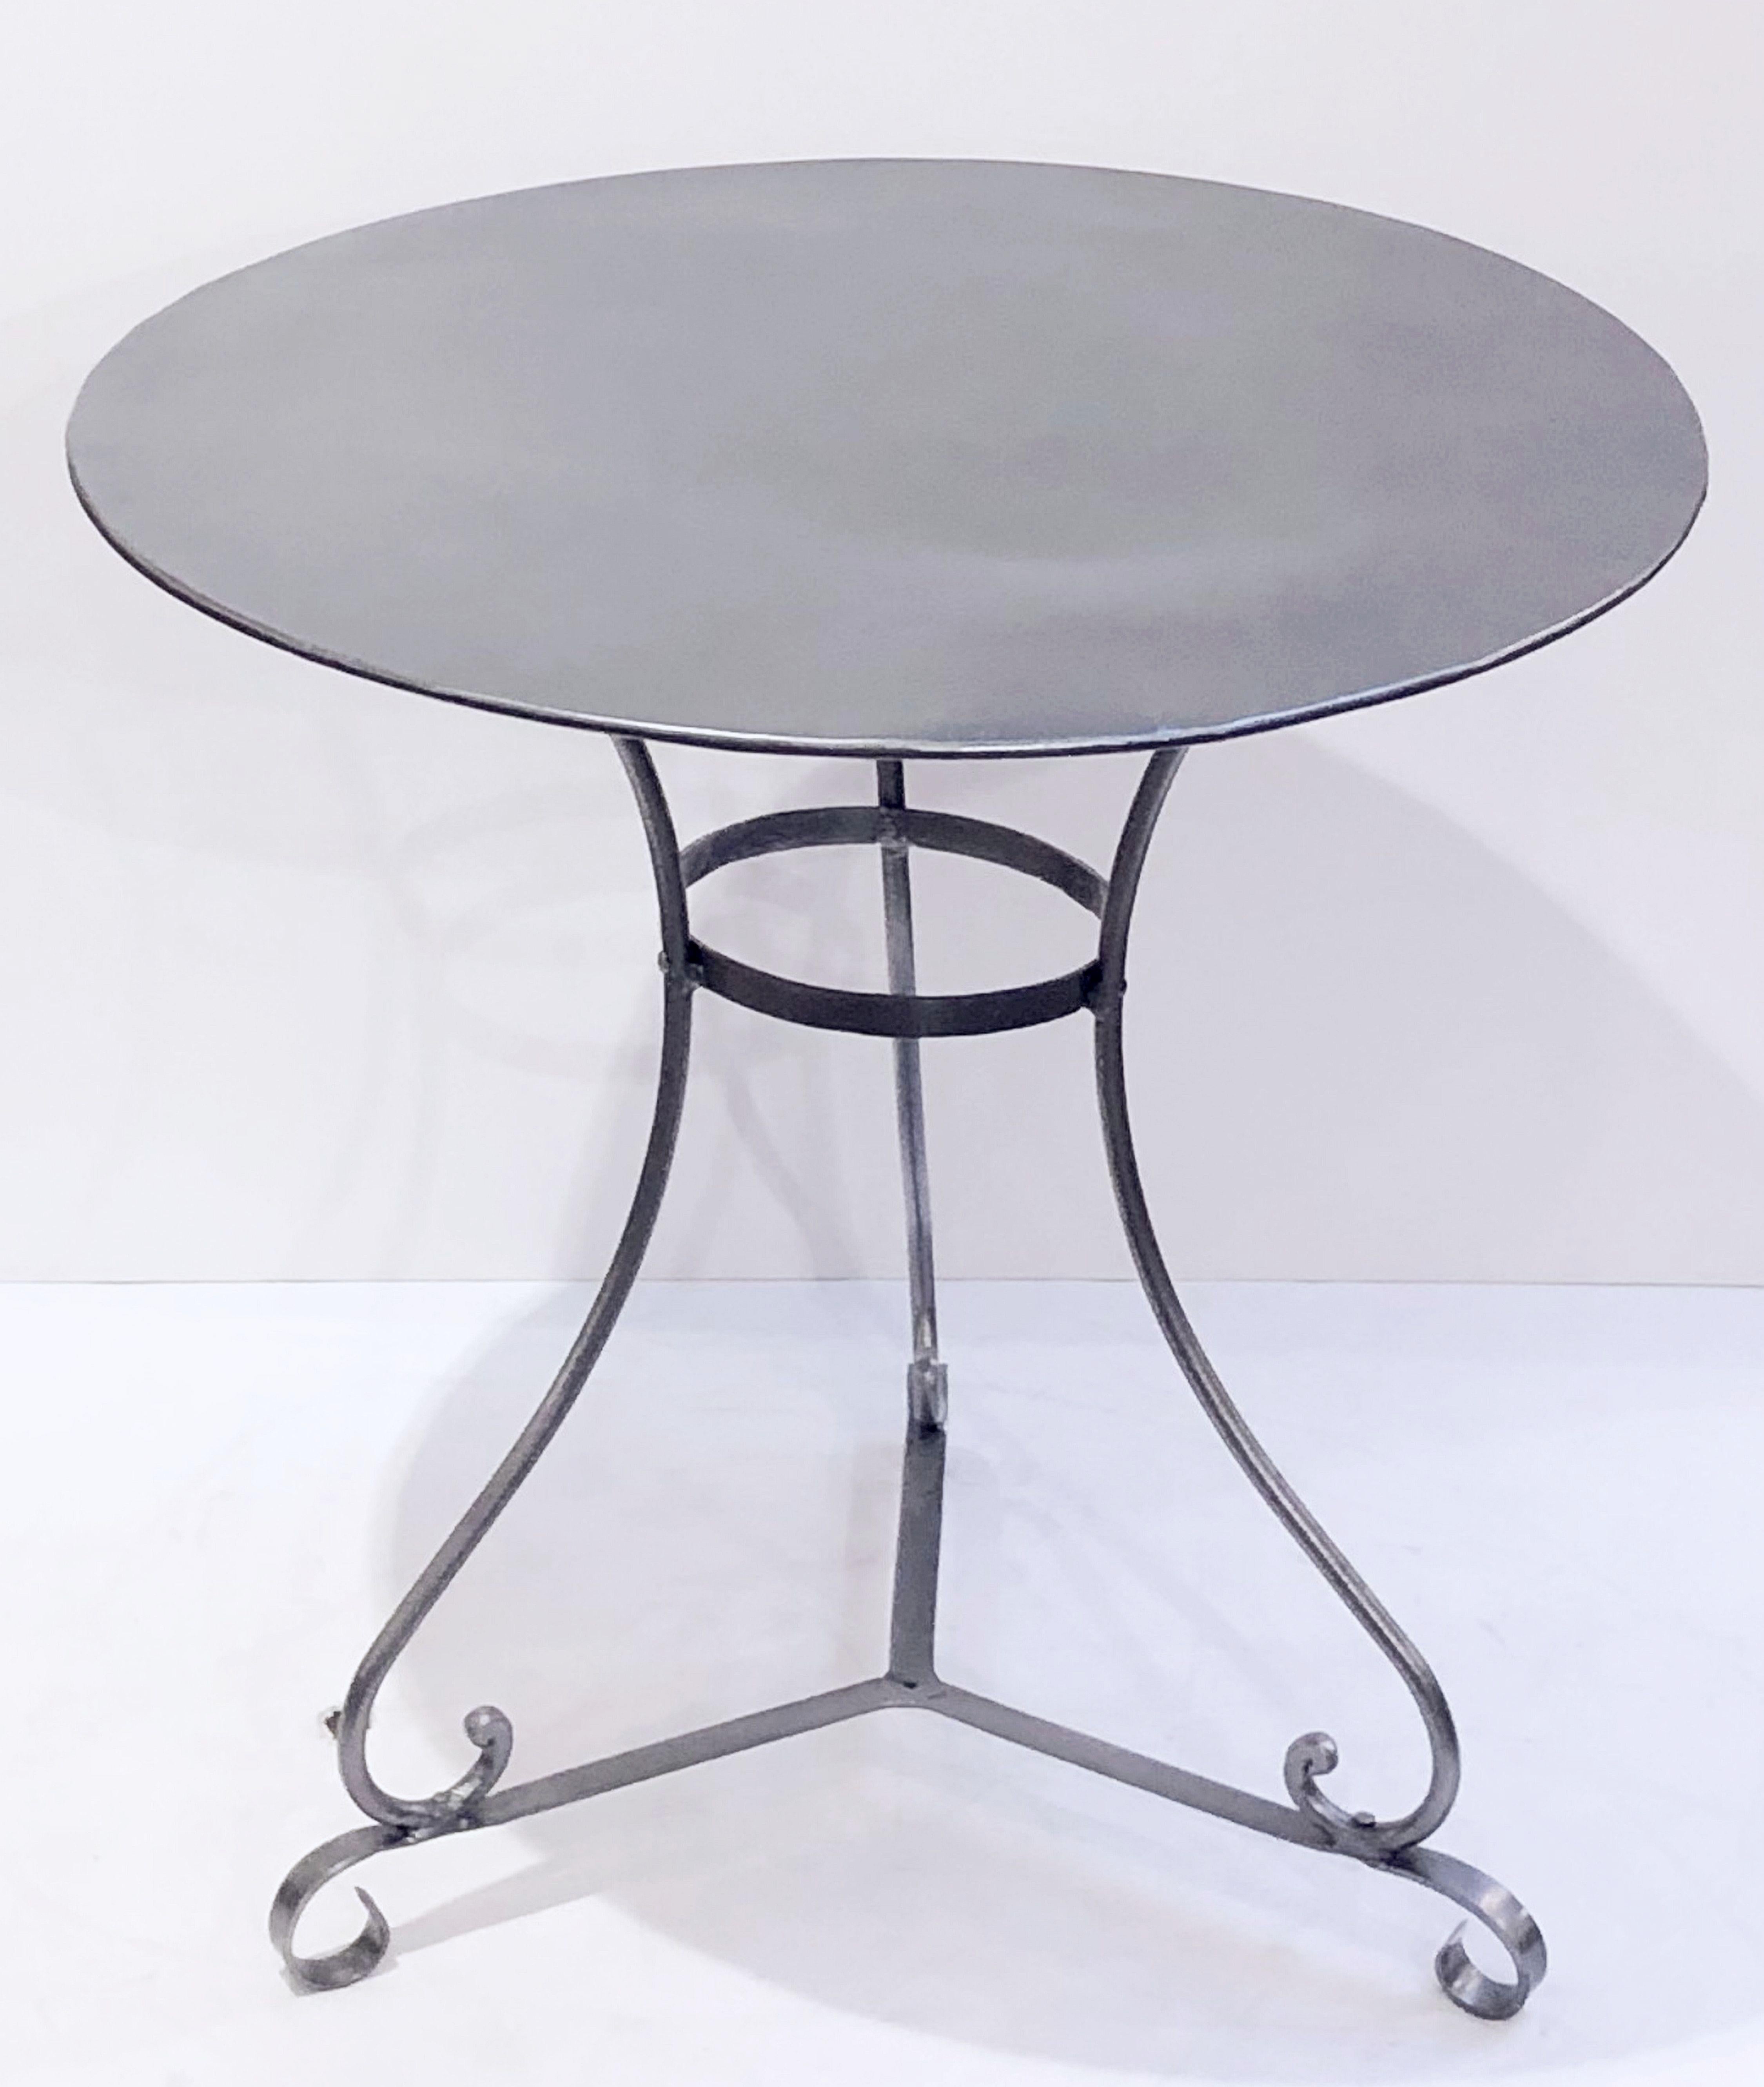 20th Century French Round Café or Bistro Pub Table